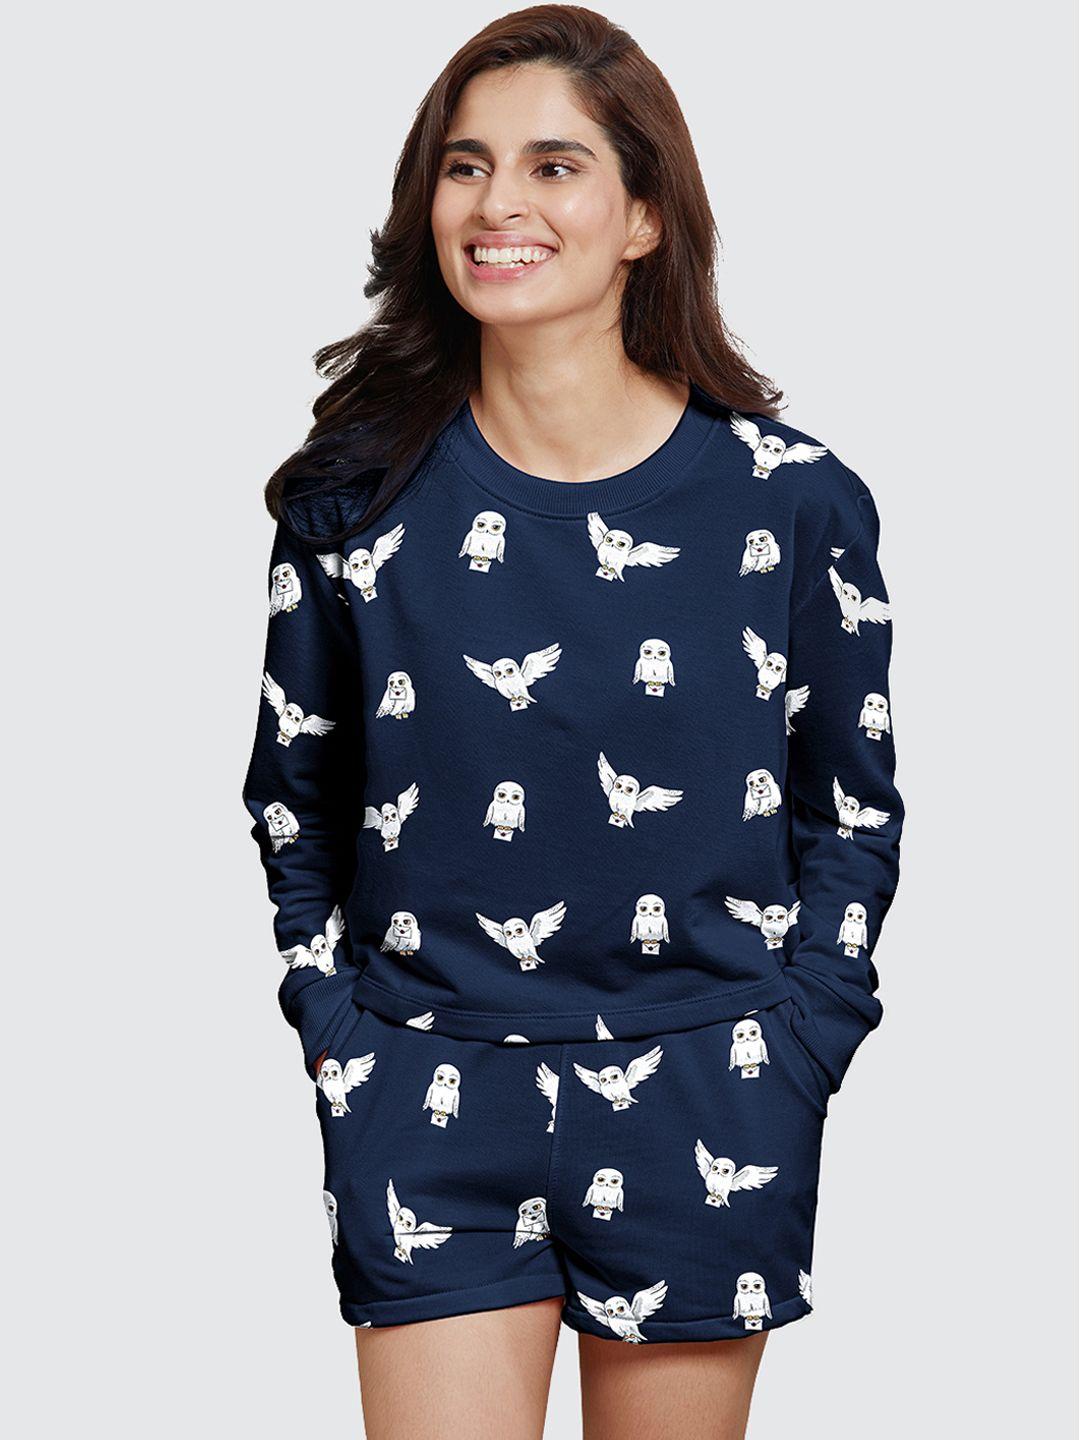 the souled store women navy blue hedwig printed co-ords